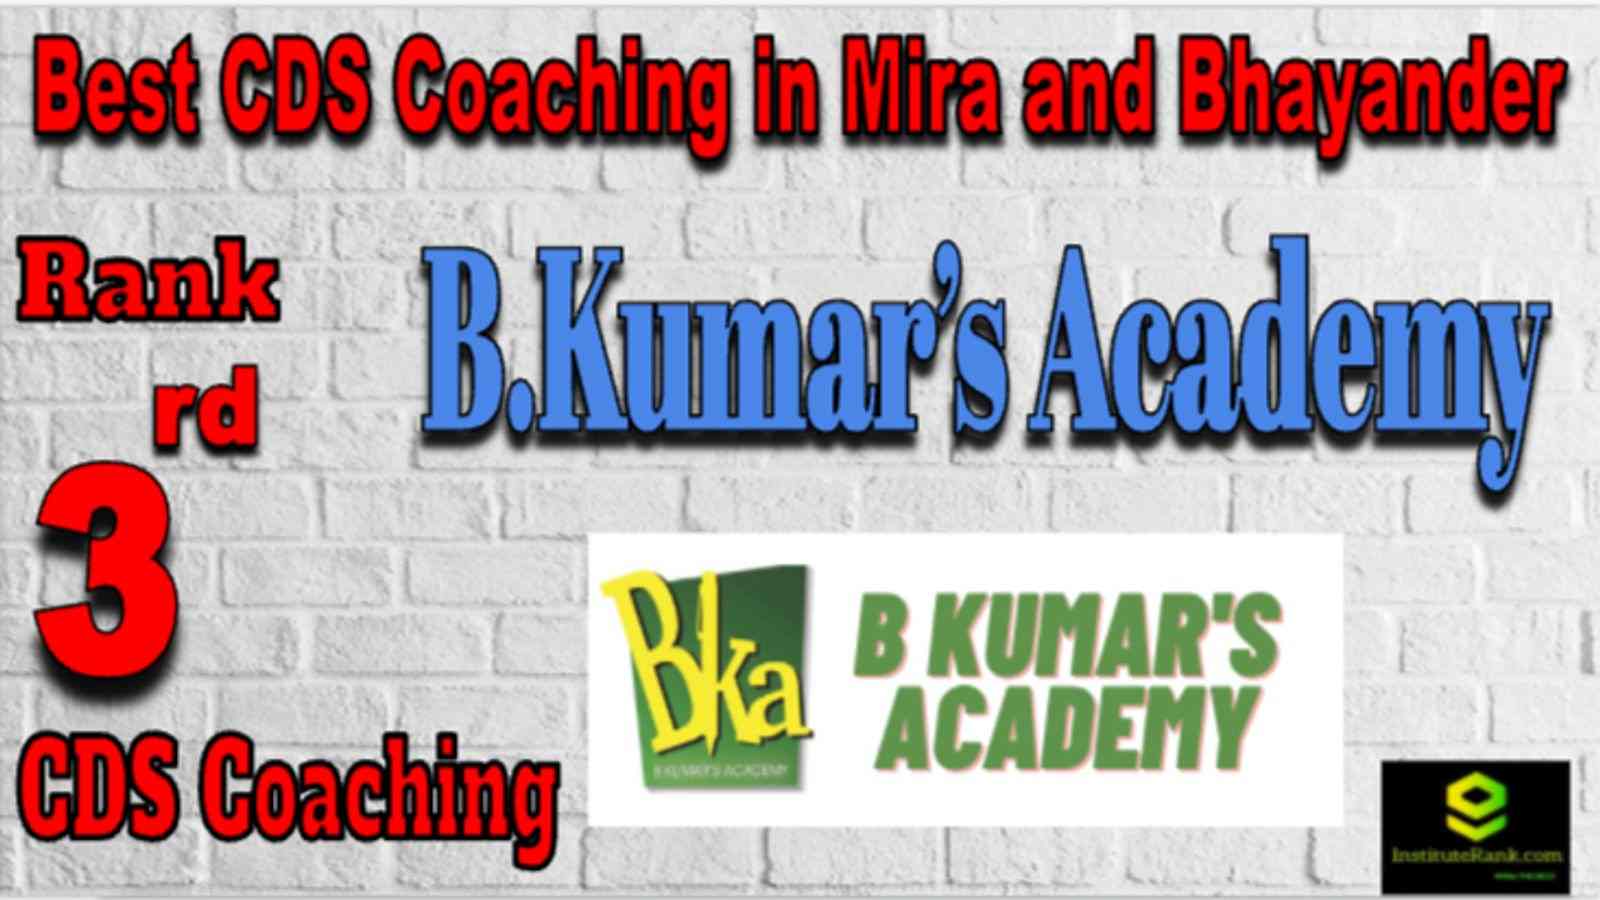 Rank 3 Best CDS Coaching in Mira and Bhayander